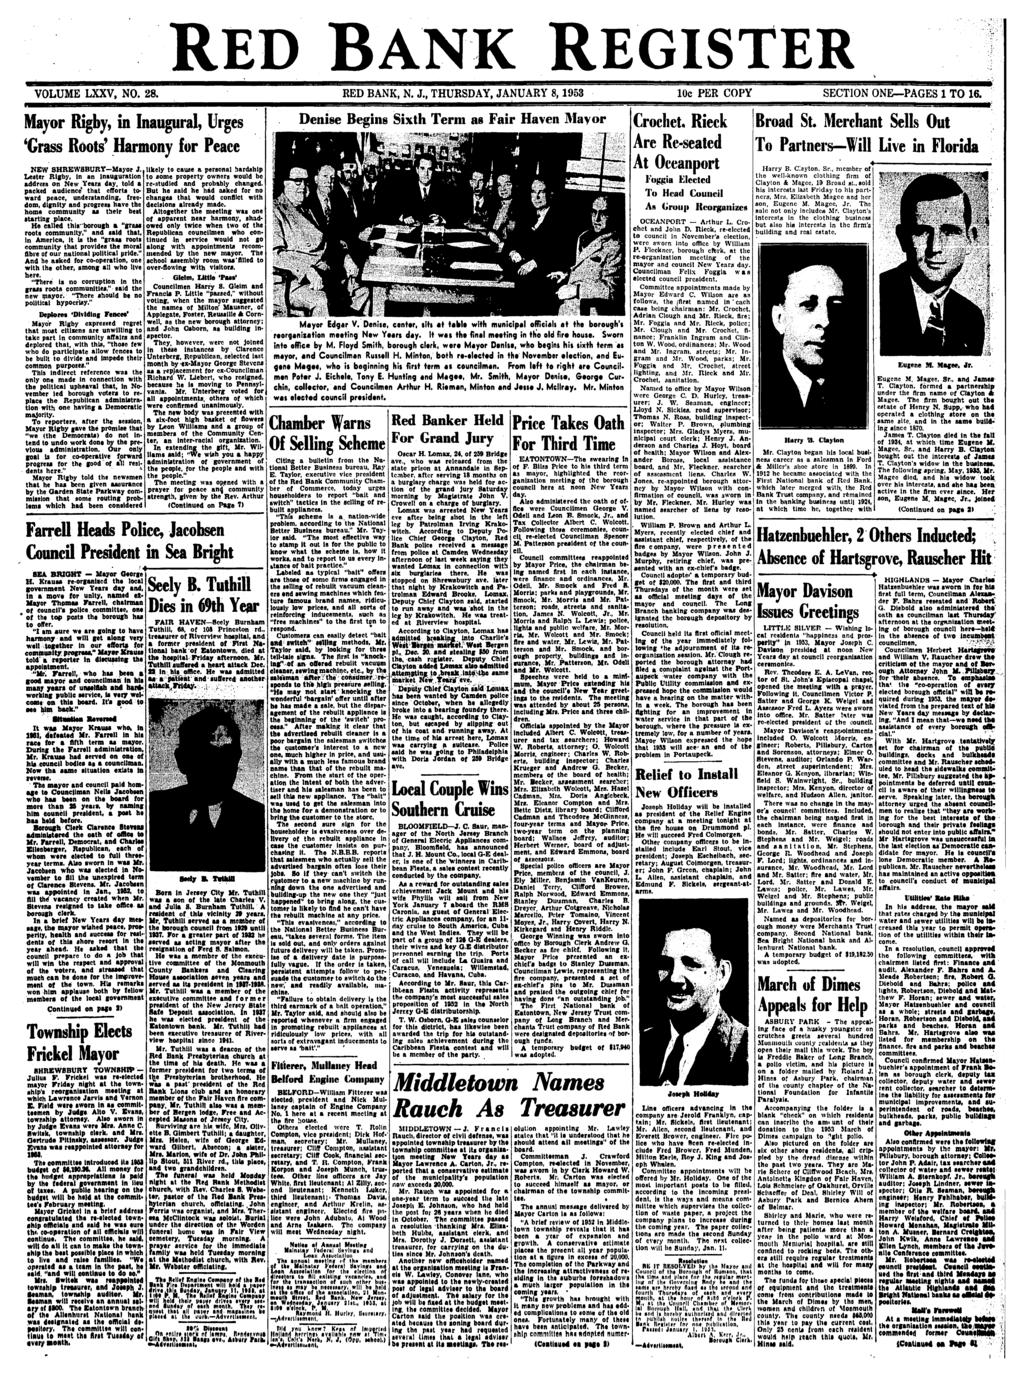 RED BANK REGSTER VOLUME LXXV, NO. 28. RED BANK, N.J., THURSDAY, JANUARY 8,1953 10c PER COPY SECTON ONE PAGES 1 TO 16.